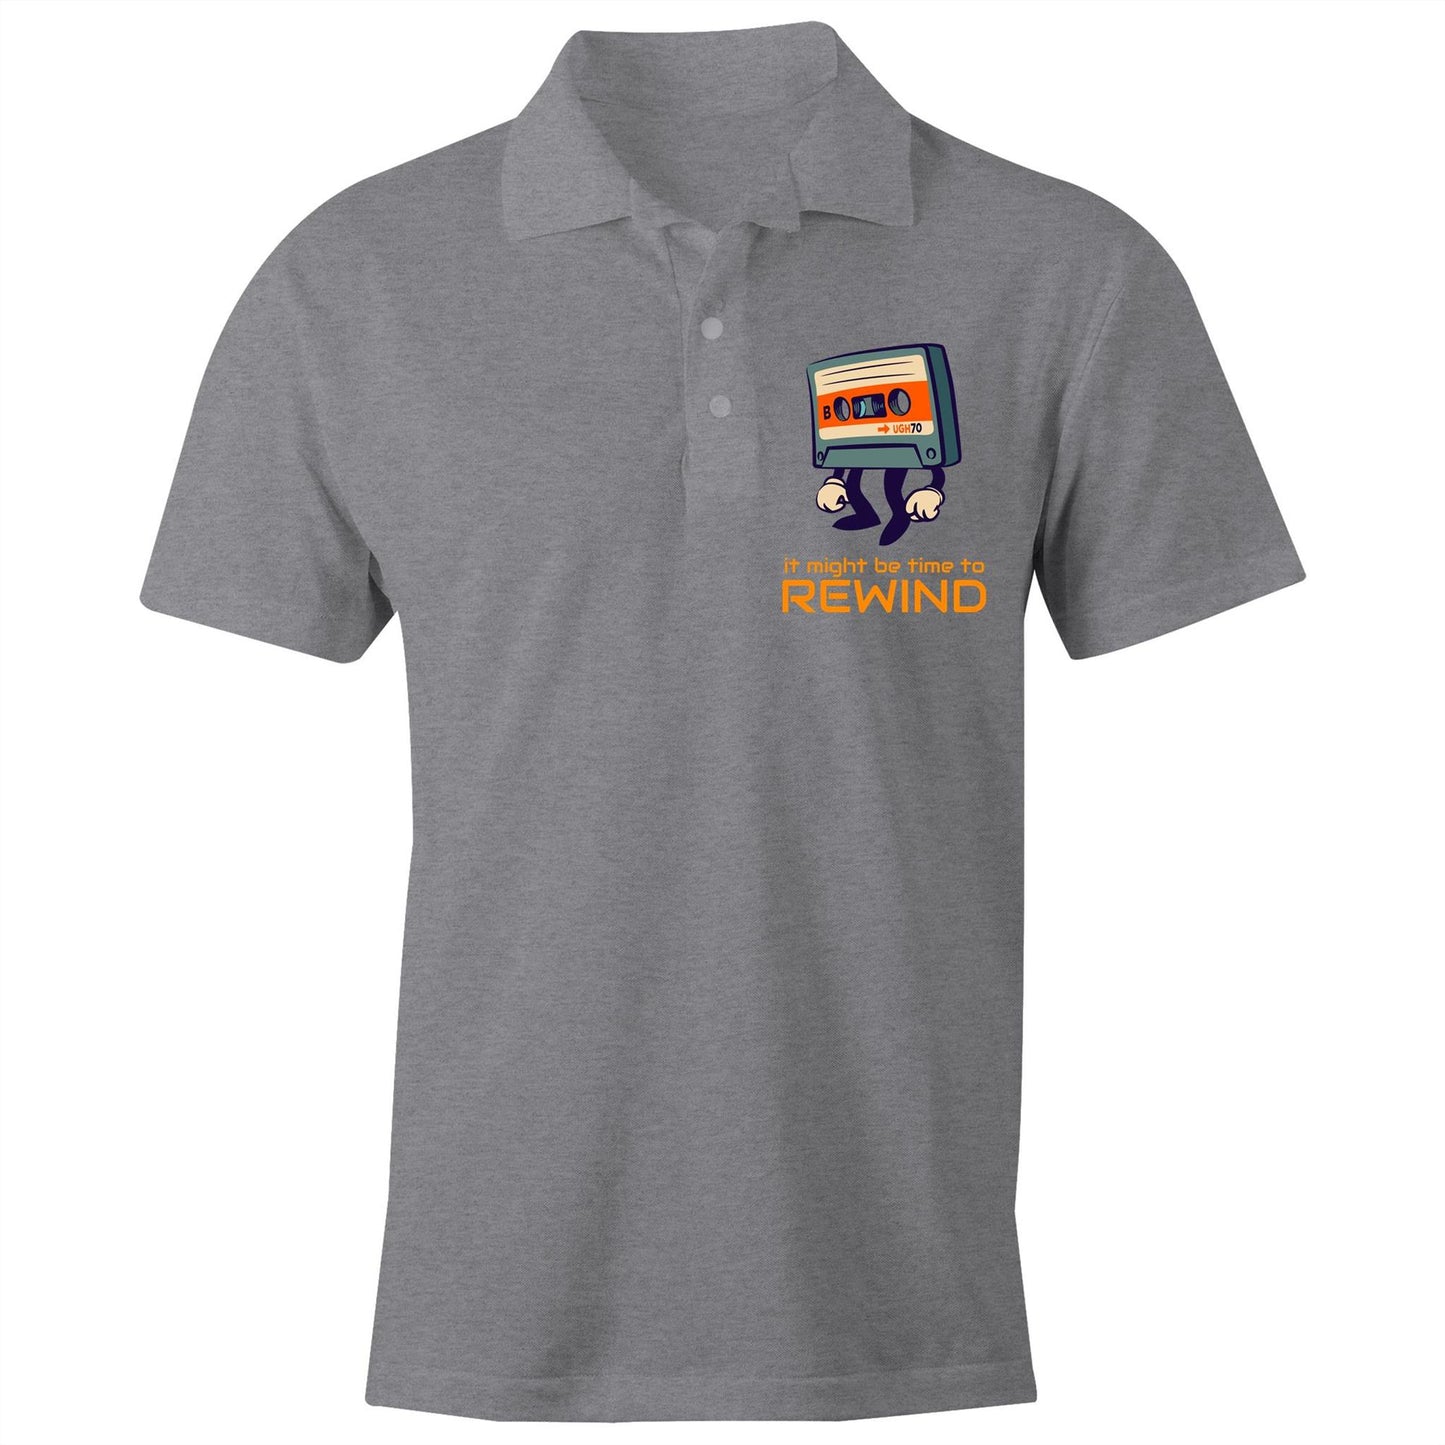 Cassette Tape, It Might Be Time To Rewind - Chad S/S Polo Shirt, Printed Grey Marle Polo Shirt Music Retro